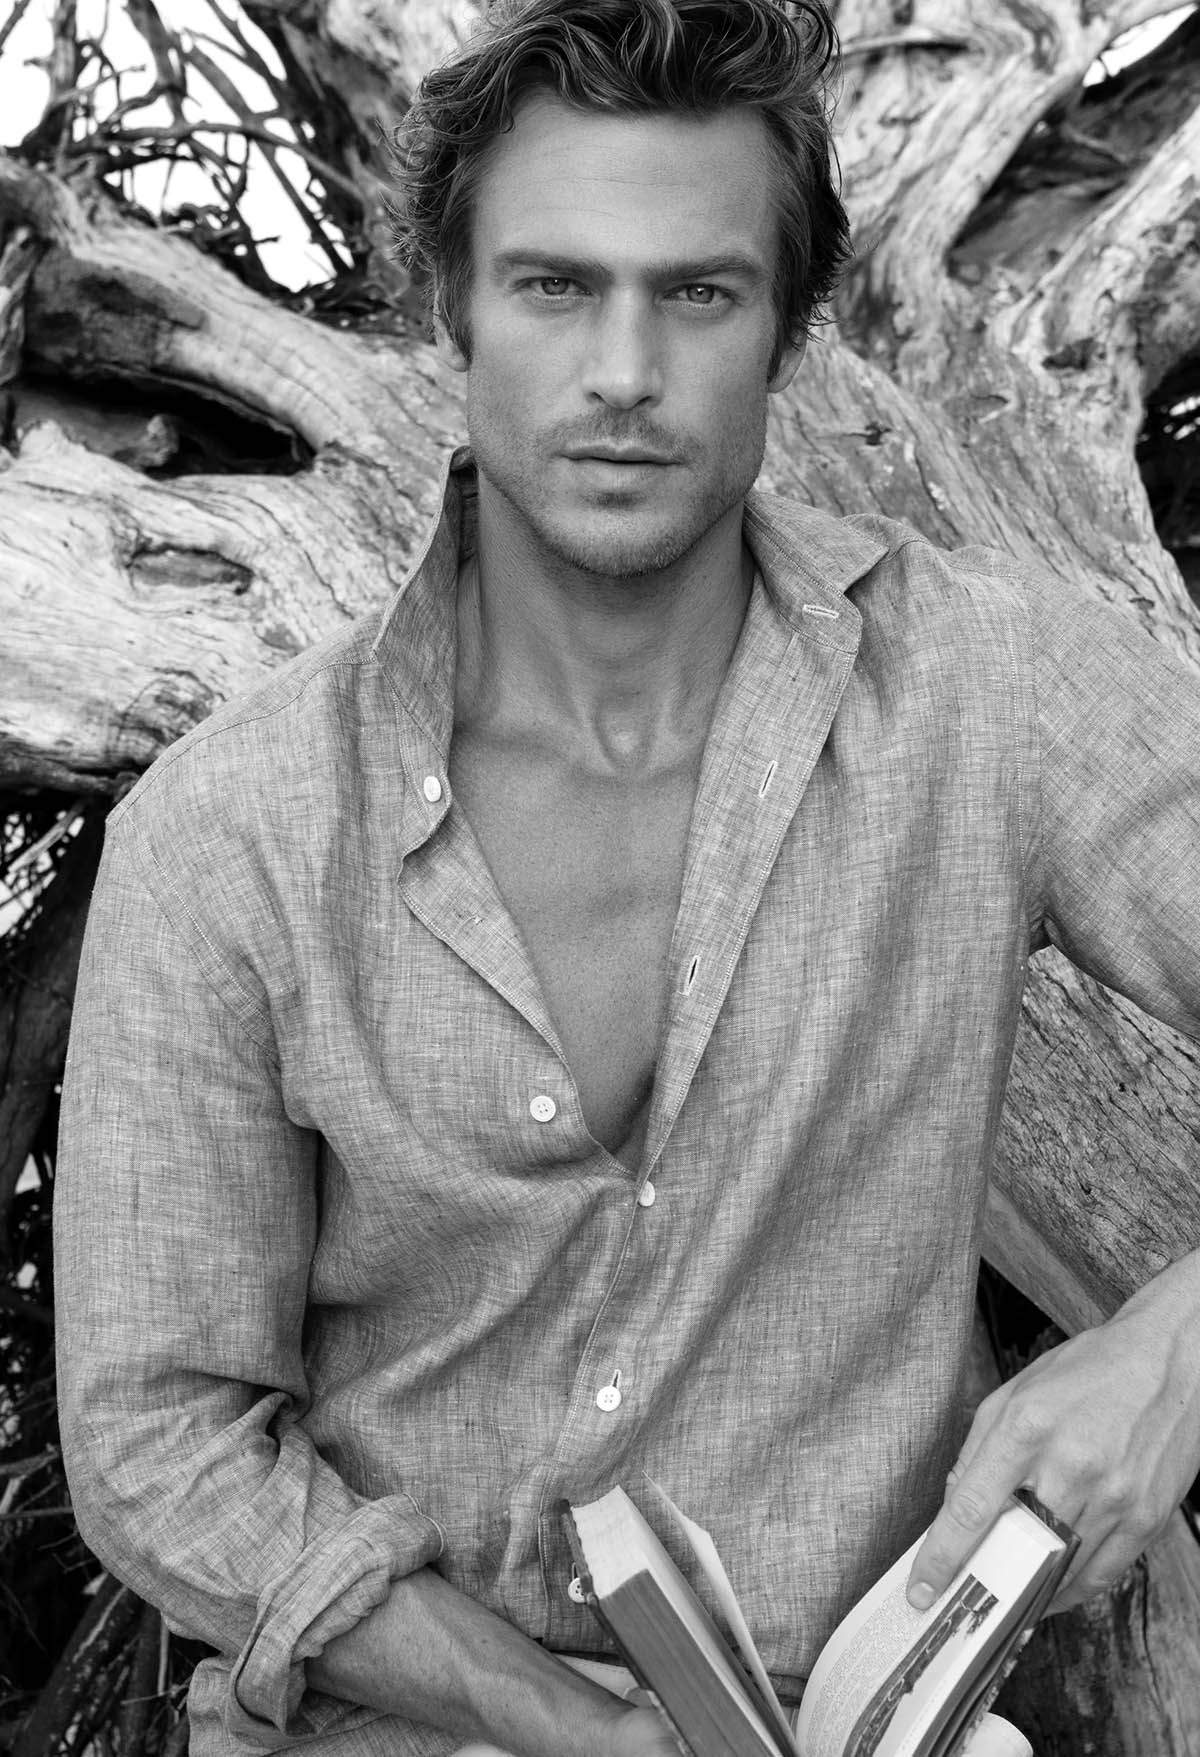 Jason Morgan by Greg Lotus for L’Officiel Hommes Italia Issue 26